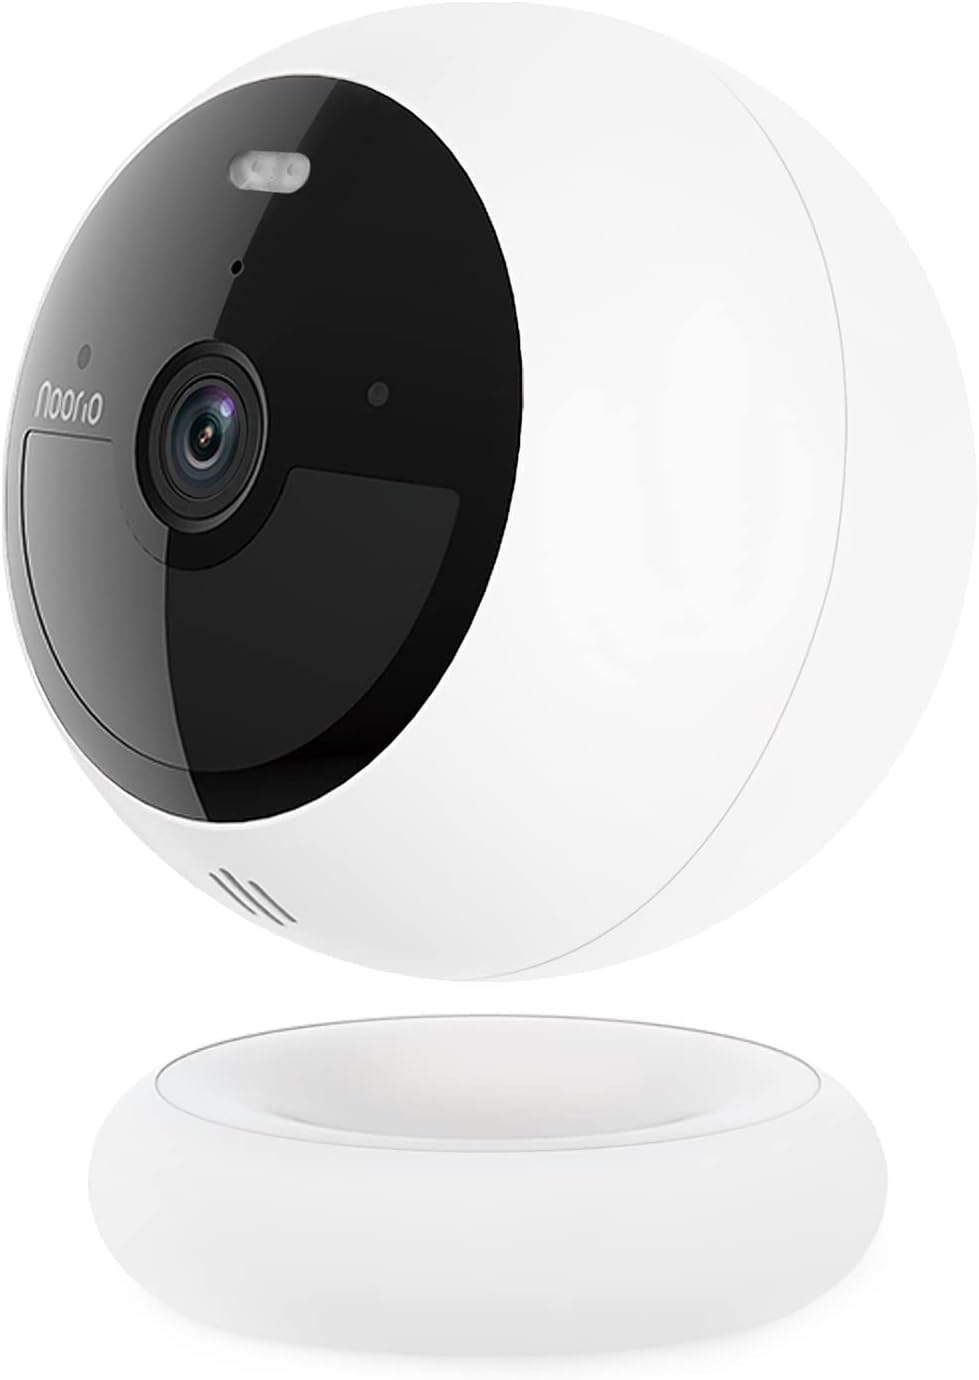 Limited-Time Offer: Noorio B210 Outdoor Security Camera - 2K Resolution, Color Night Vision, Alexa Compatible